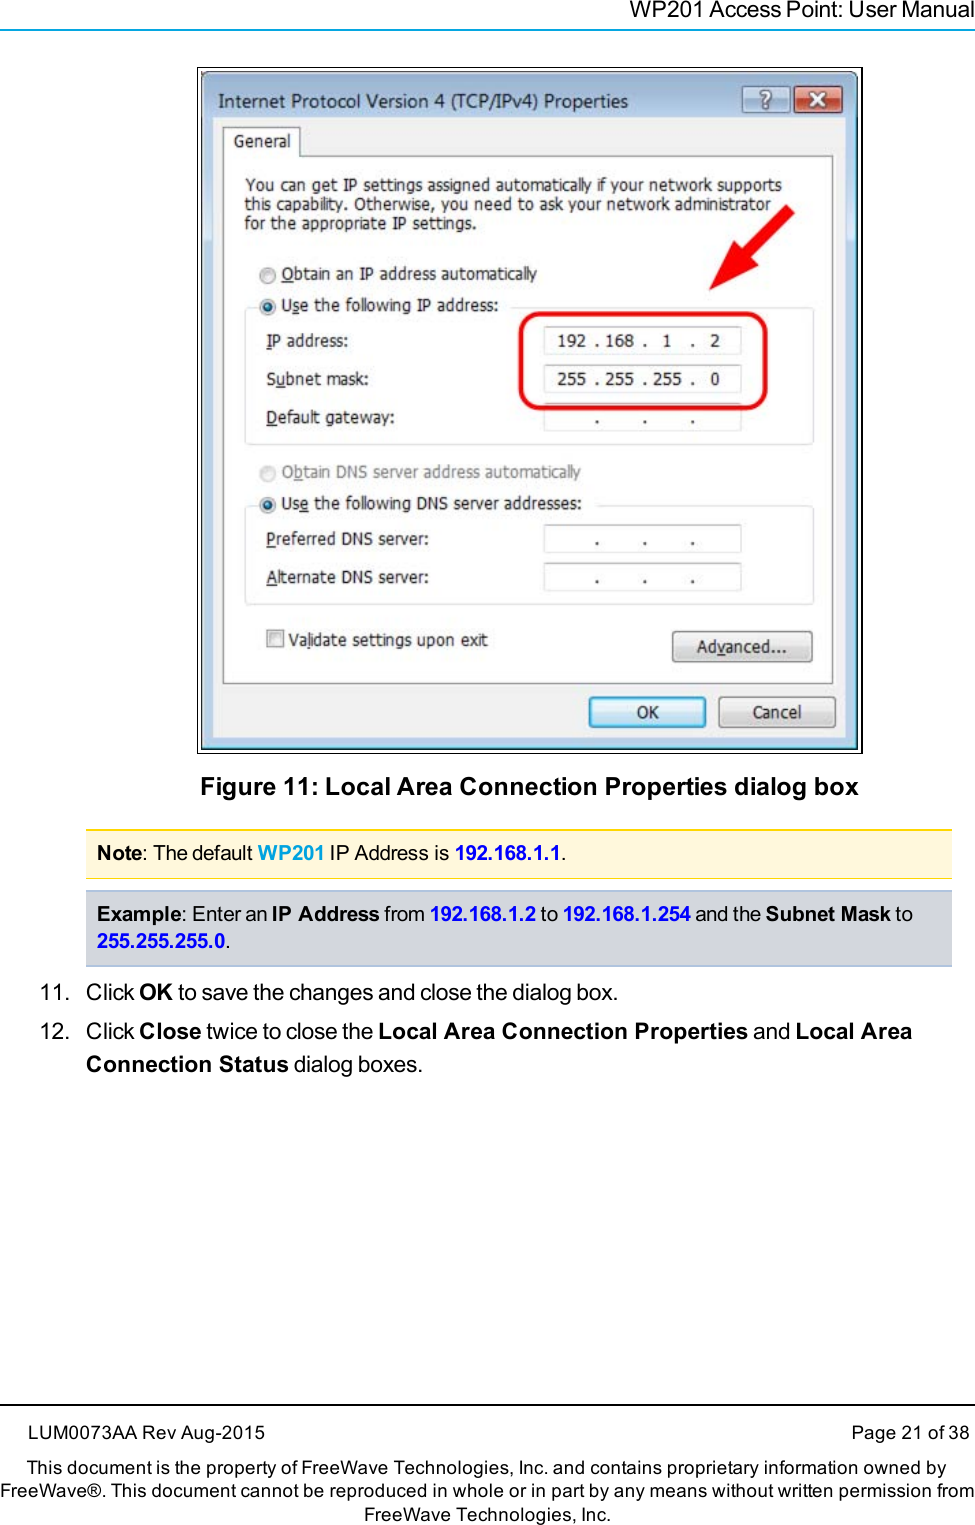 WP201 Access Point: User ManualFigure 11: Local Area Connection Properties dialog boxNote: The default WP201 IP Address is 192.168.1.1.Example: Enter an IP Address from 192.168.1.2 to 192.168.1.254 and the Subnet Mask to255.255.255.0.11. Click OK to save the changes and close the dialog box.12. Click Close twice to close the Local Area Connection Properties and Local AreaConnection Status dialog boxes.LUM0073AA Rev Aug-2015 Page 21 of 38This document is the property of FreeWave Technologies, Inc. and contains proprietary information owned byFreeWave®. This document cannot be reproduced in whole or in part by any means without written permission fromFreeWave Technologies, Inc.